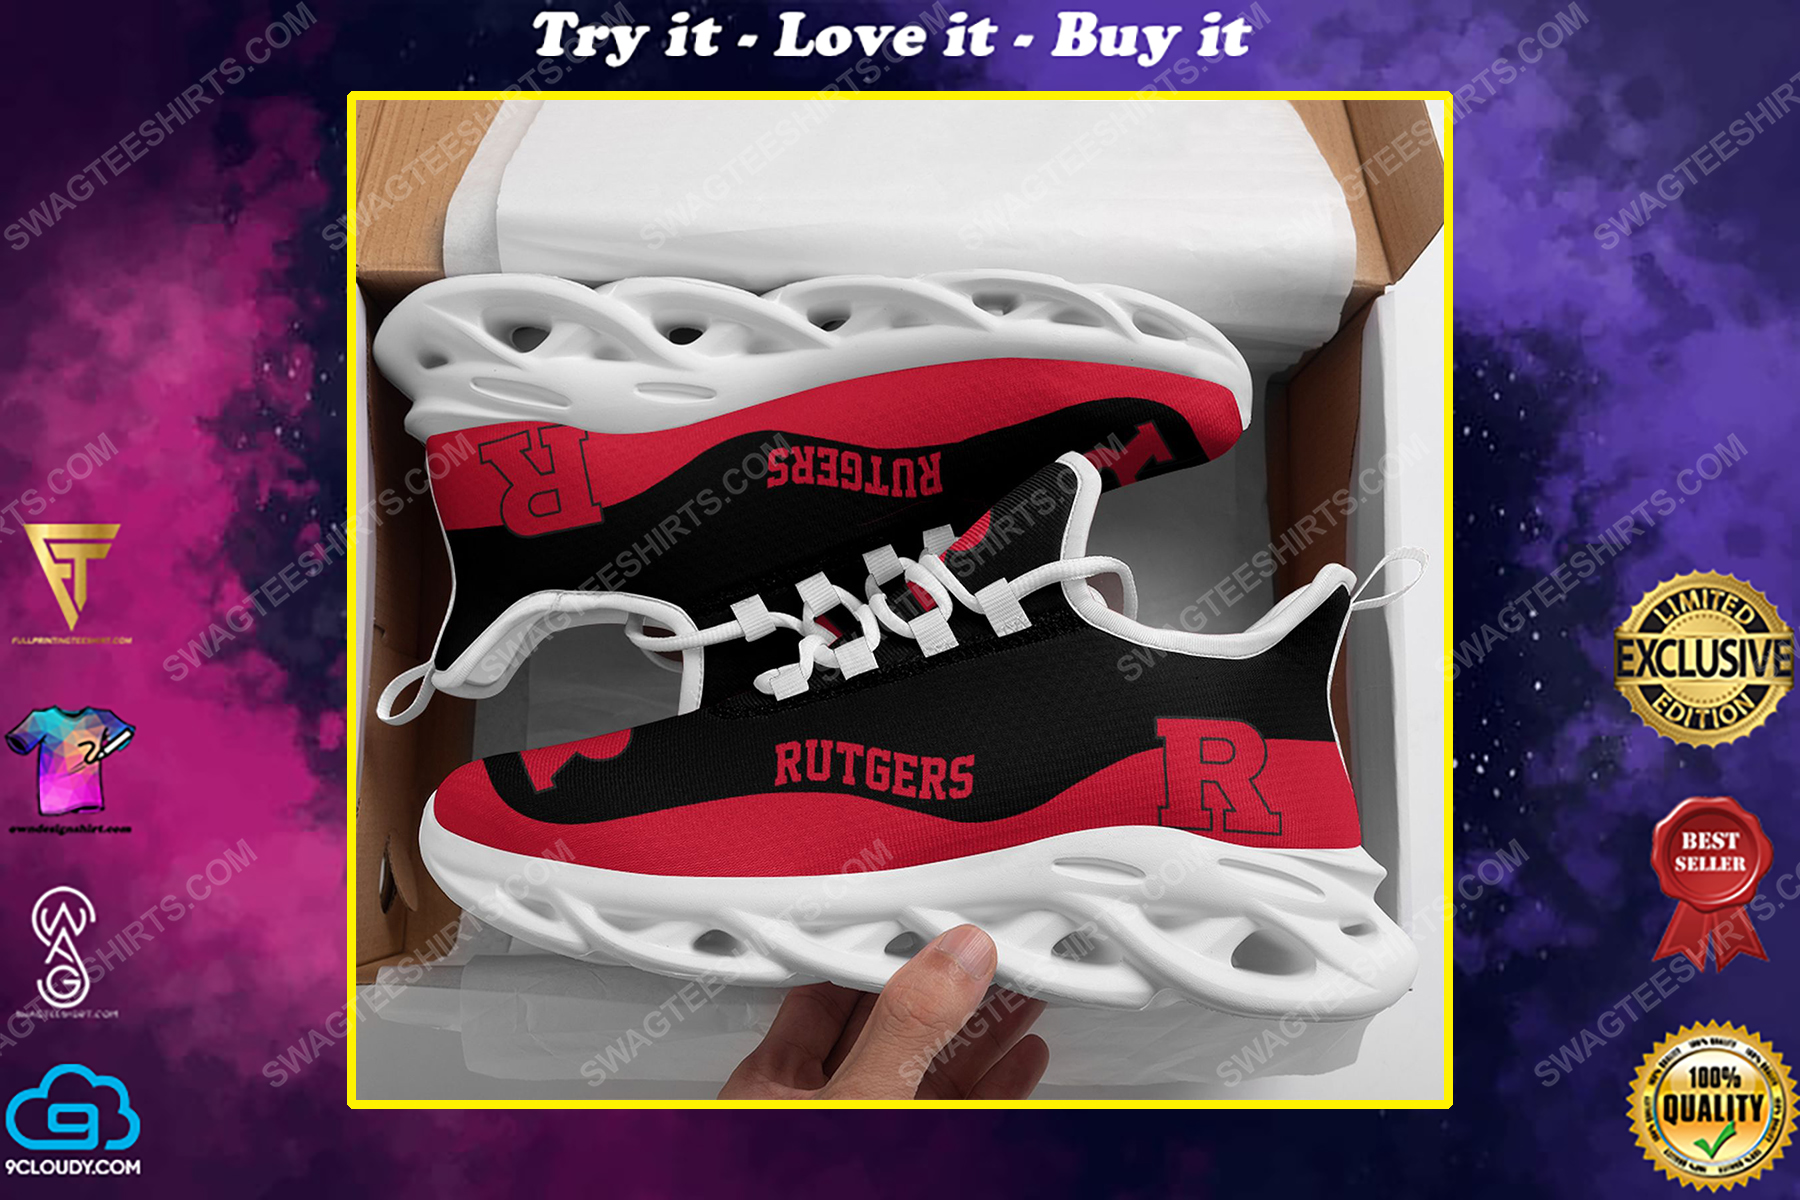 Rutgers scarlet knights football team max soul shoes